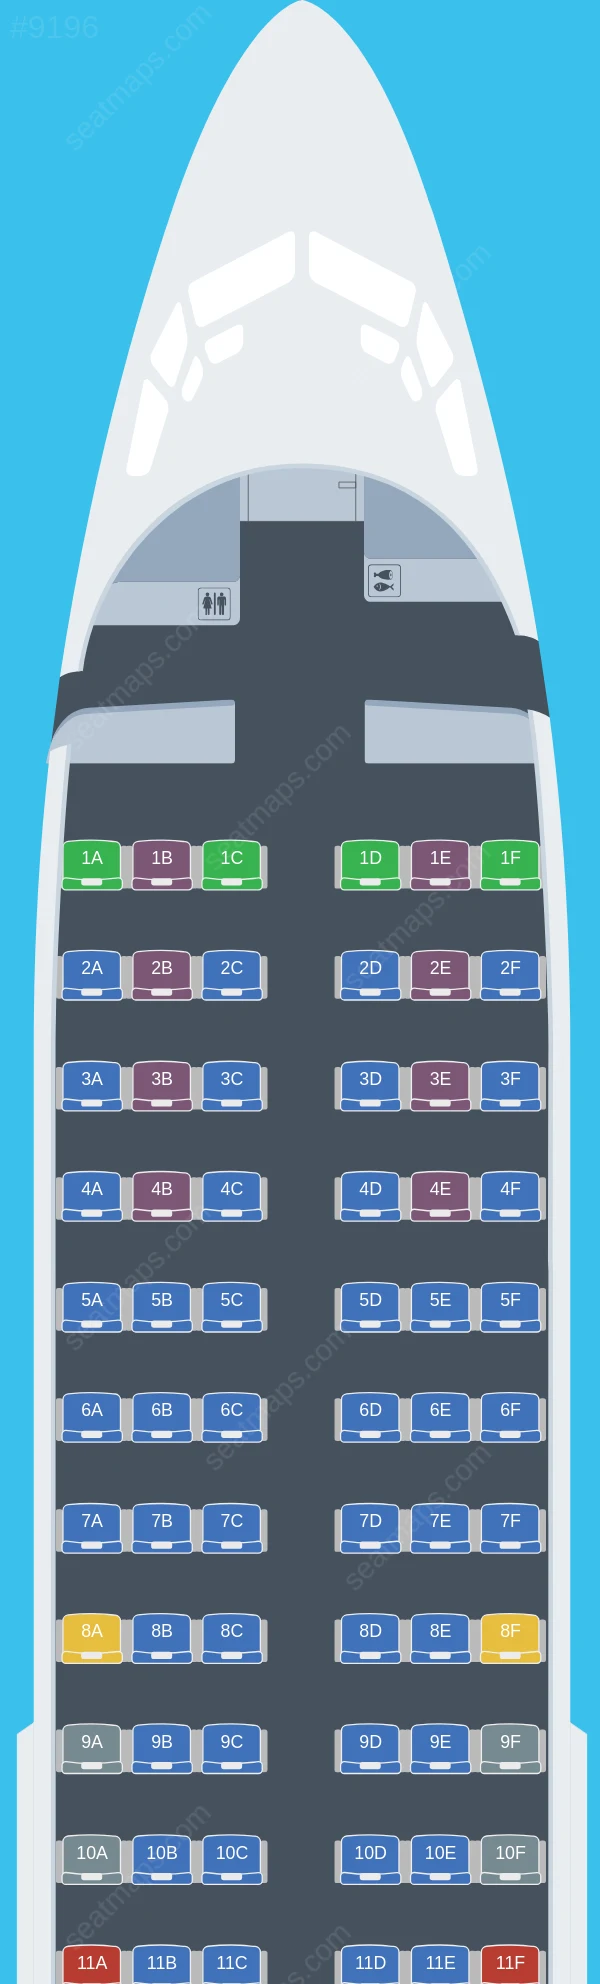 FlyEgypt Boeing 737-700 seatmap preview